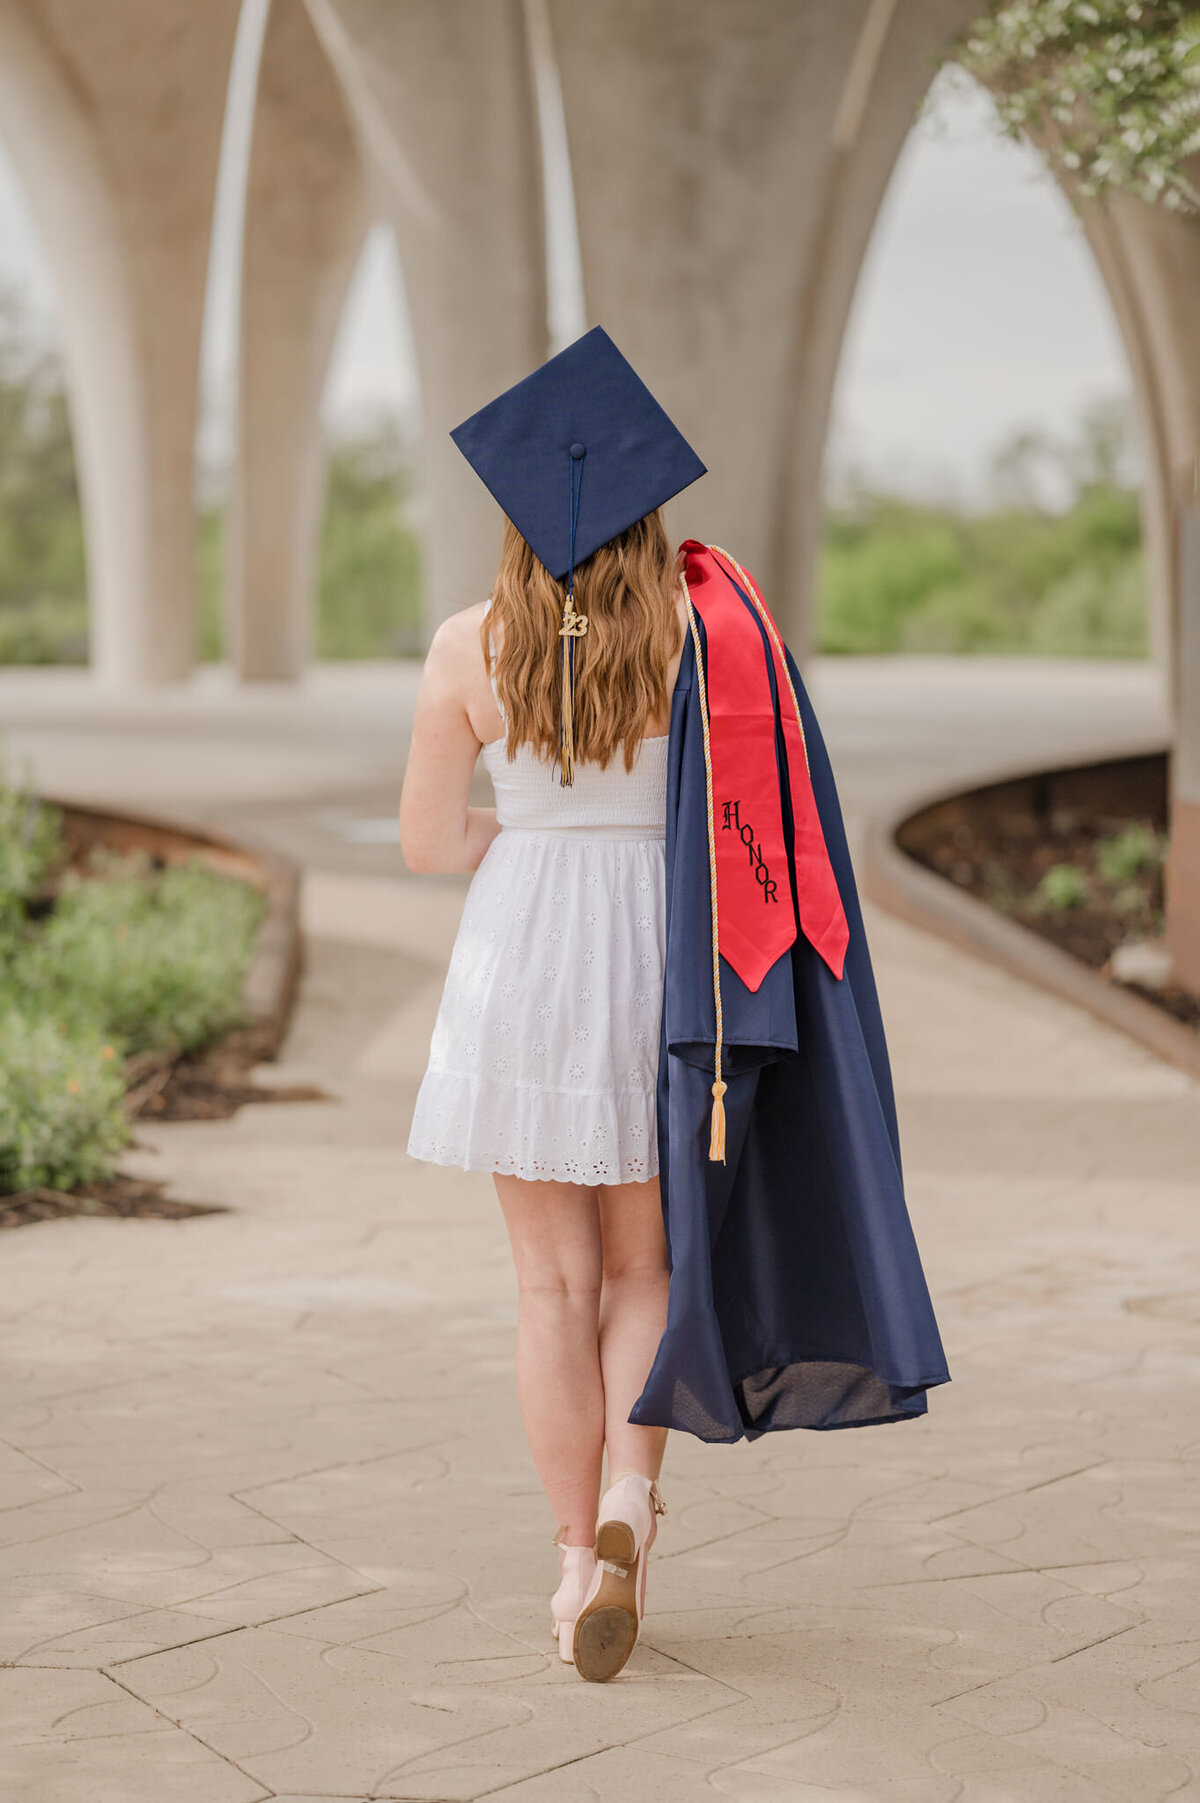 Graduation picture of a San Antonio girl wearing her cap and holding her gown over her shoulder as she walks away from the camera.